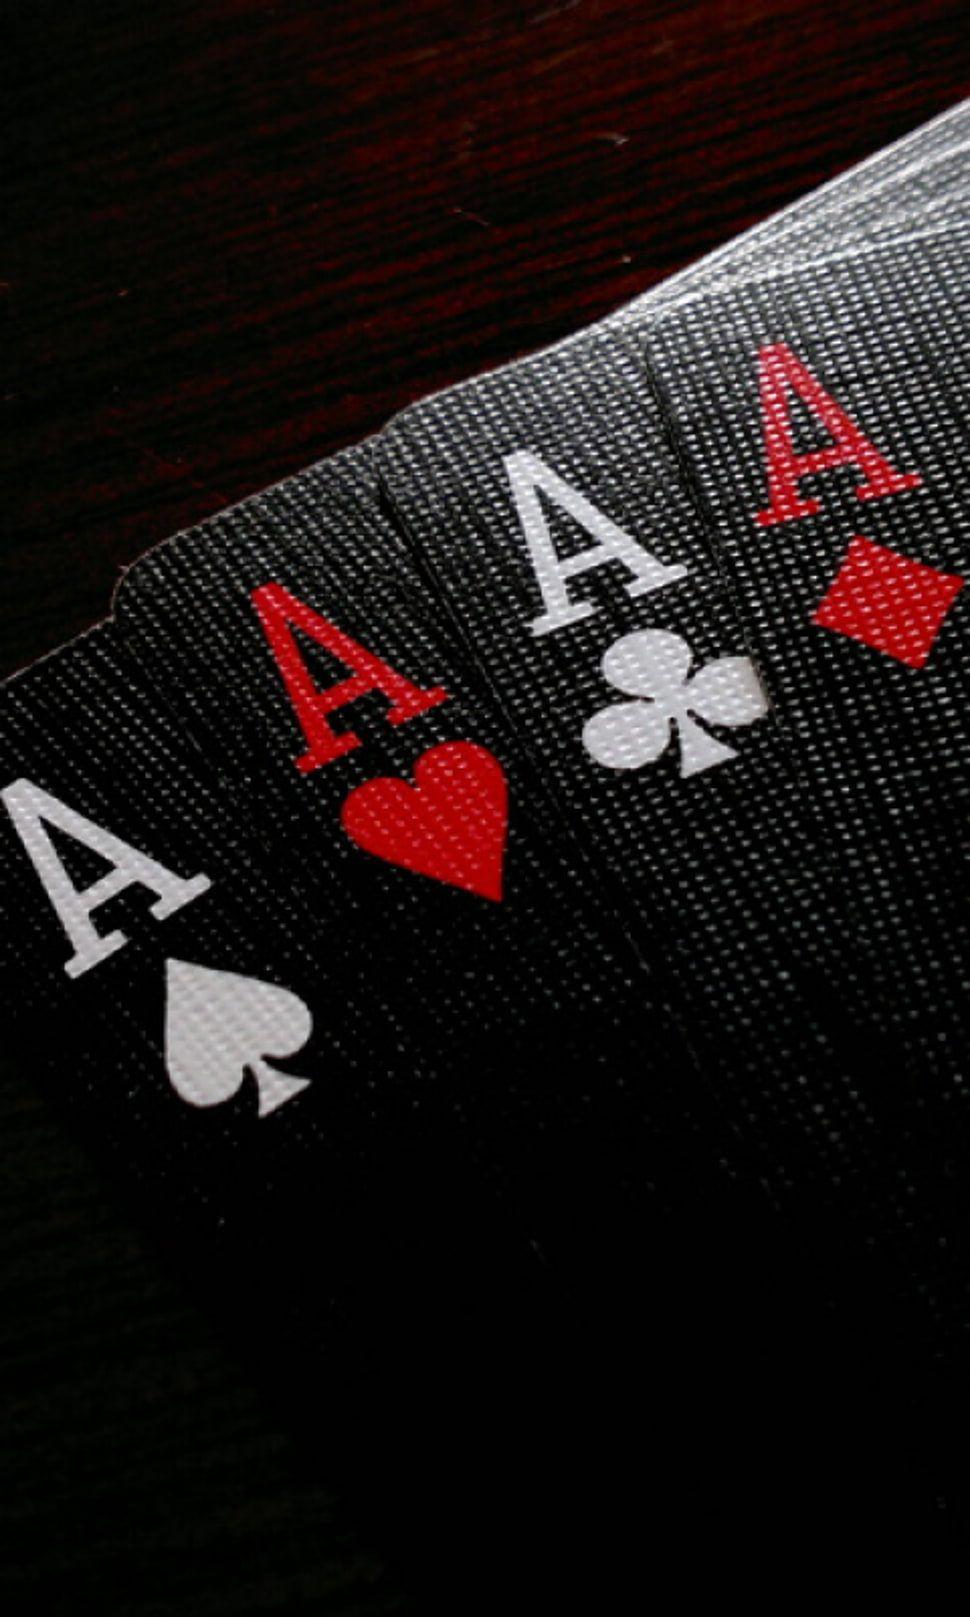 Ace of Spade, Heart, Clubs and Diamond playing cards photography HD